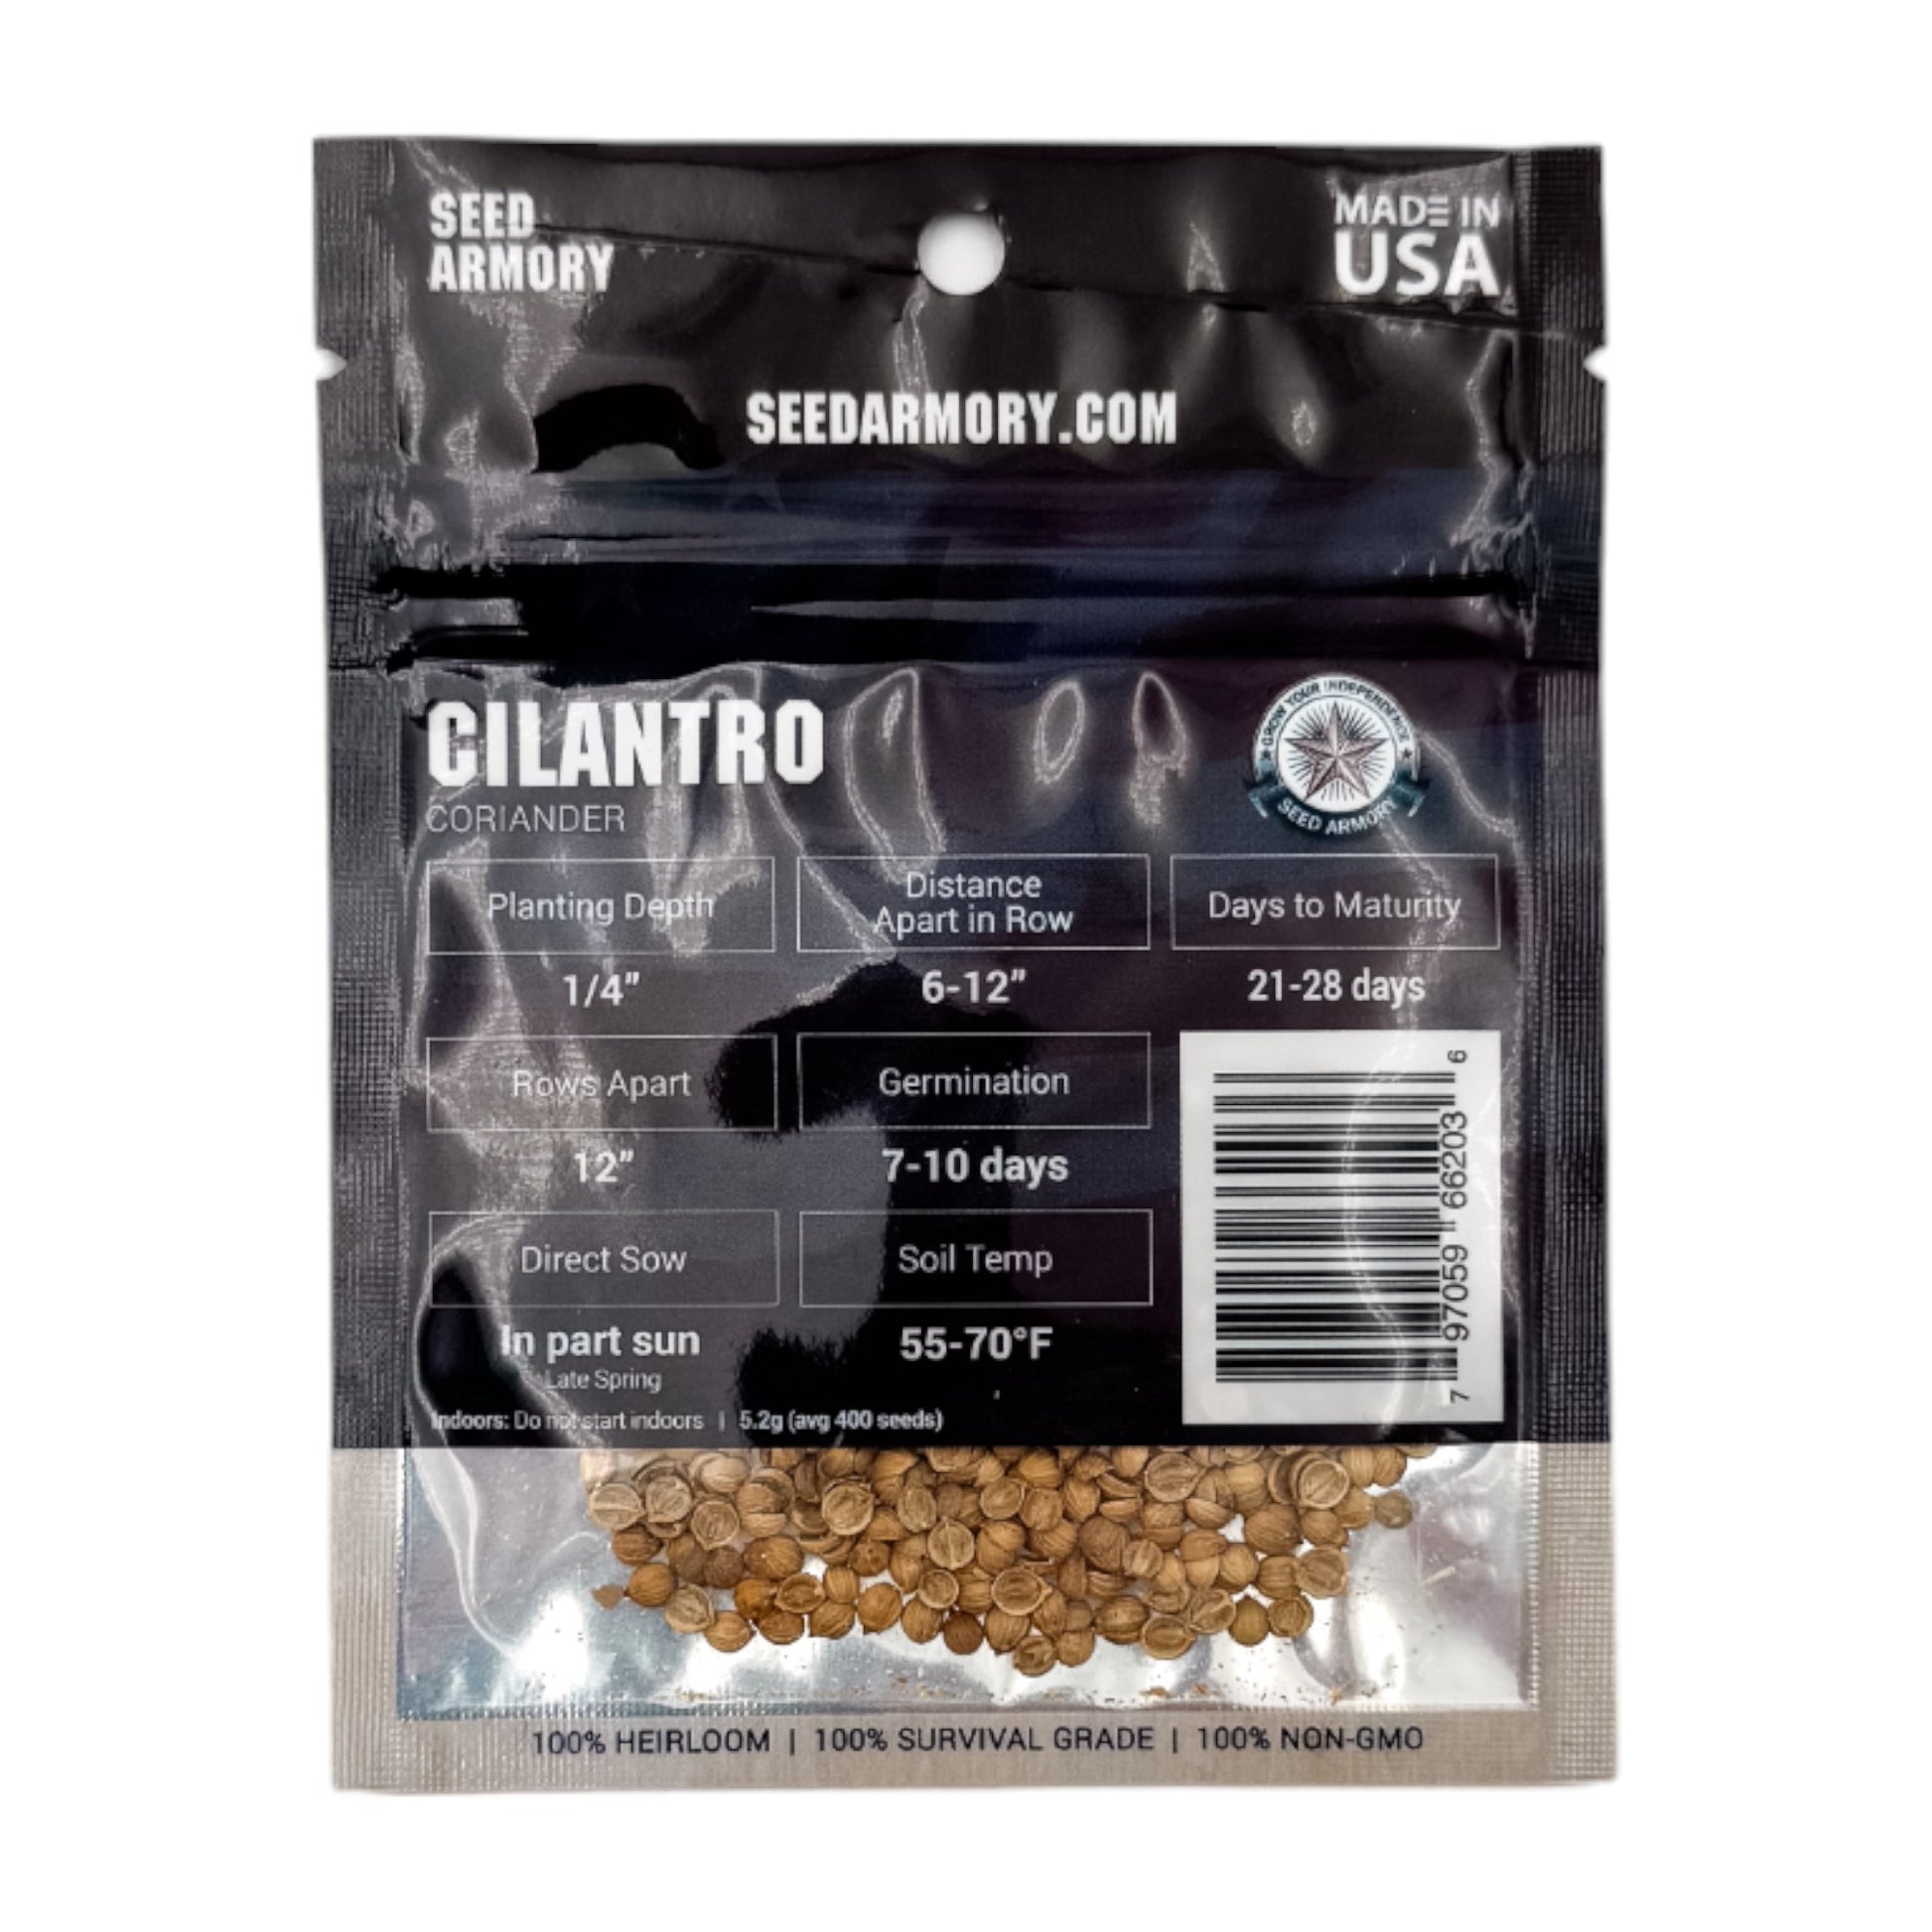 Reverse packet of Heirloom Cilantro Coriander seeds with planting instructions